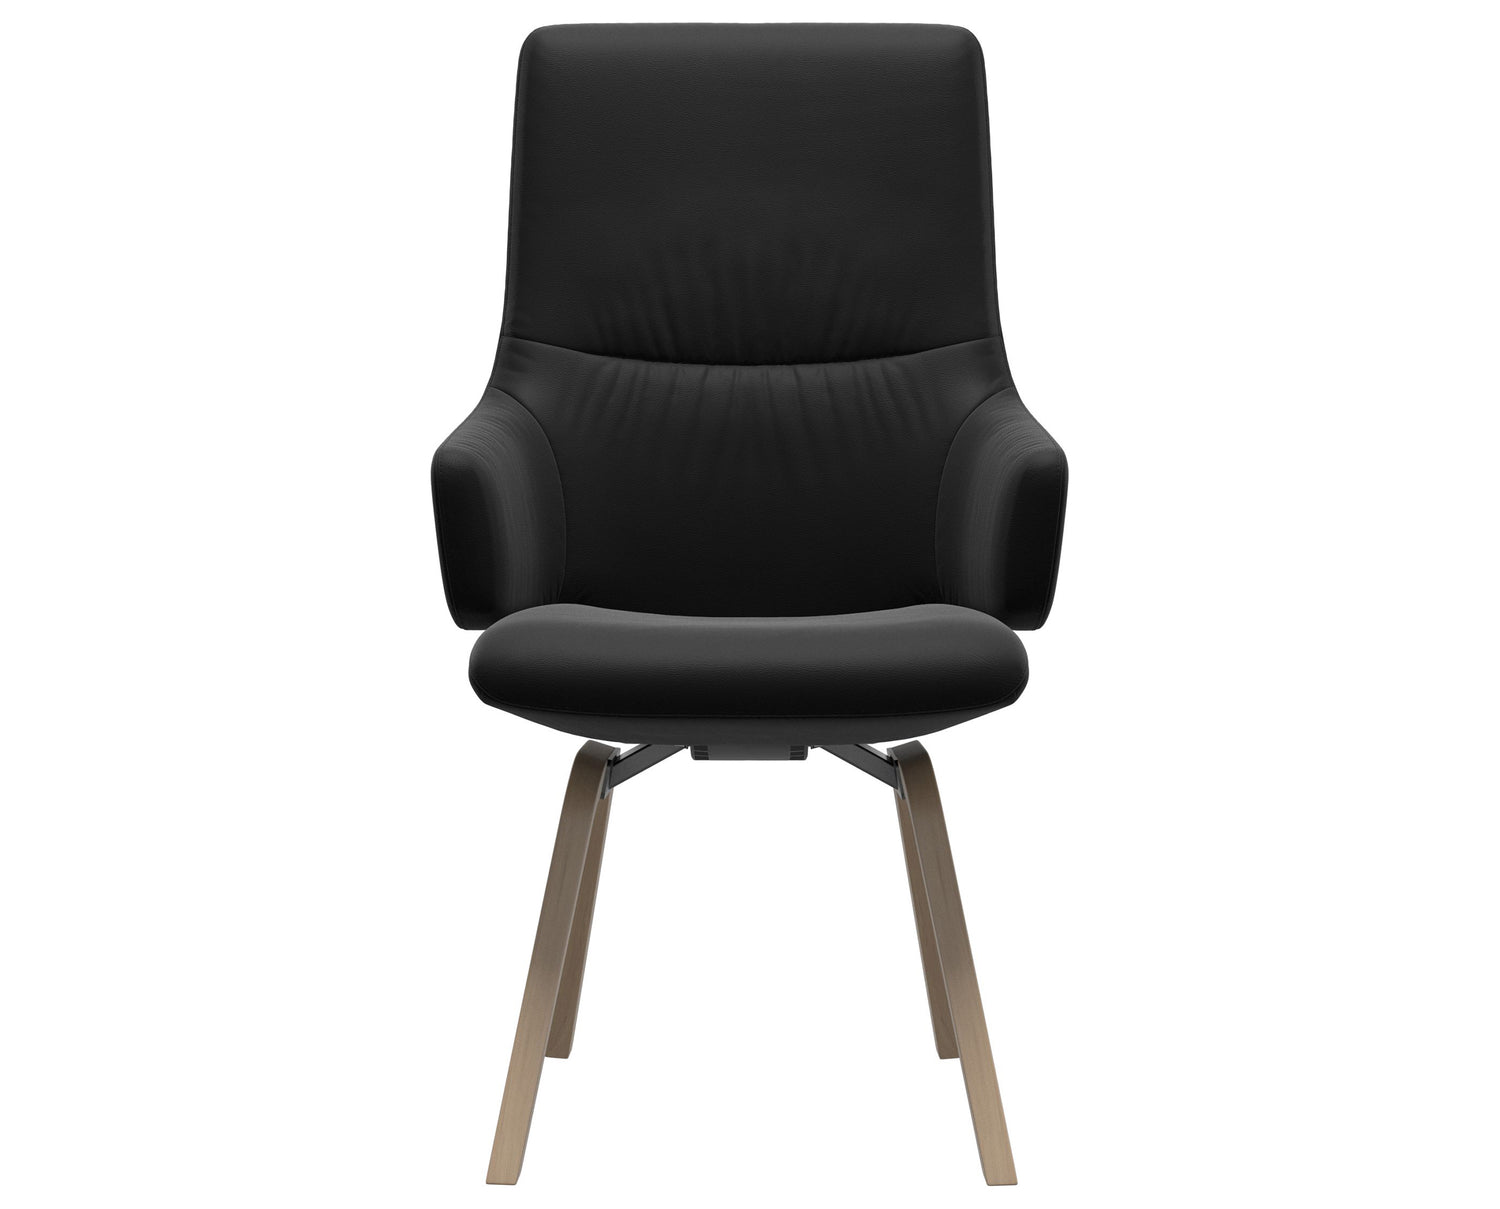 Paloma Leather Black & Natural Base | Stressless Mint High Back D200 Dining Chair w/Arms | Valley Ridge Furniture